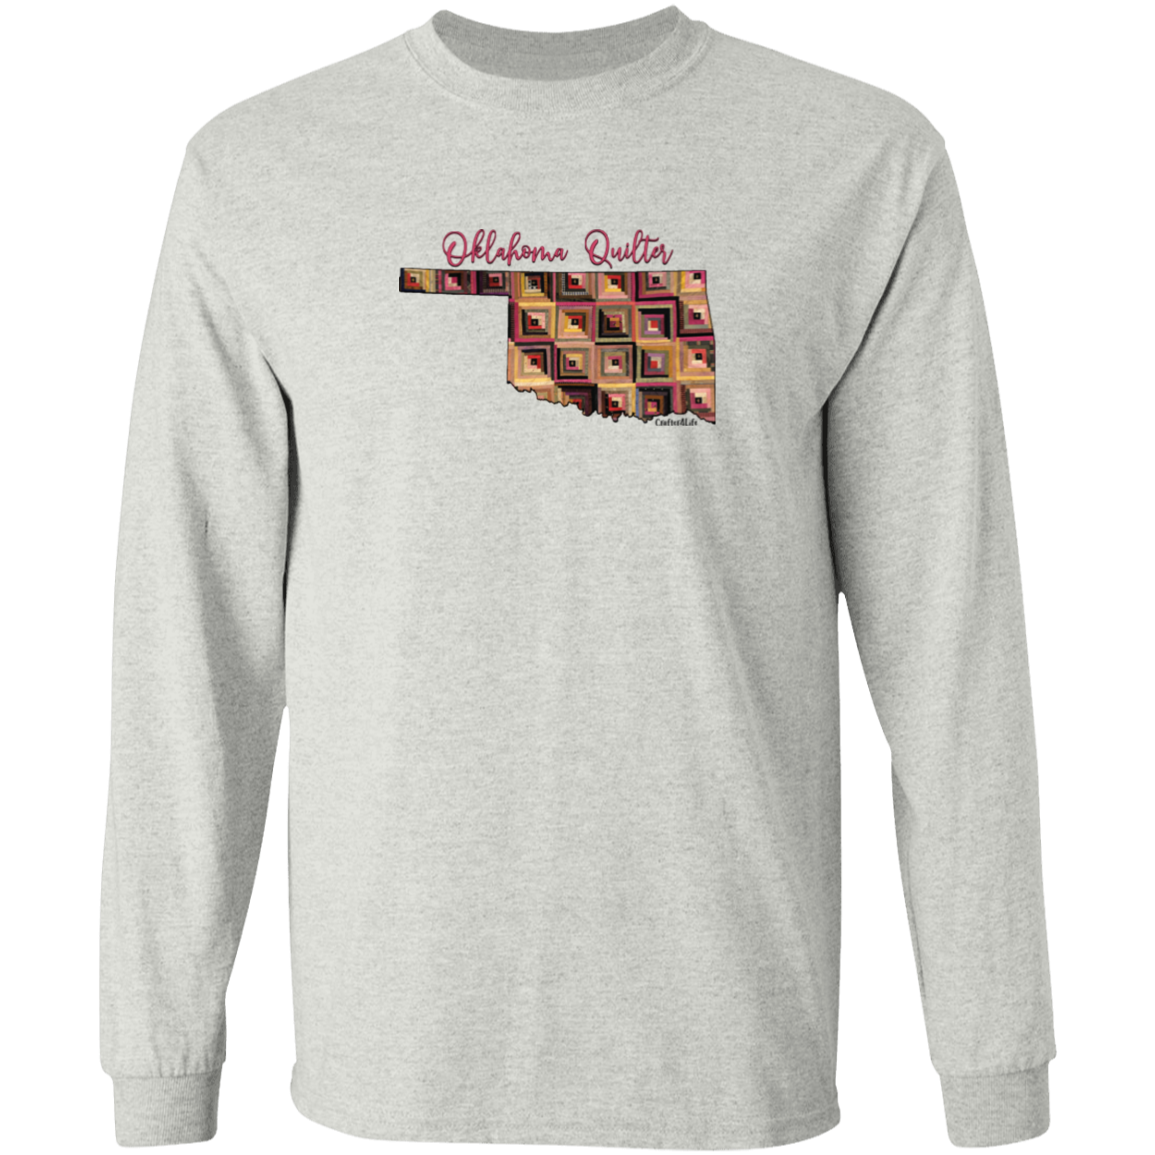 Oklahoma Quilter Long Sleeve T-Shirt, Gift for Quilting Friends and Family